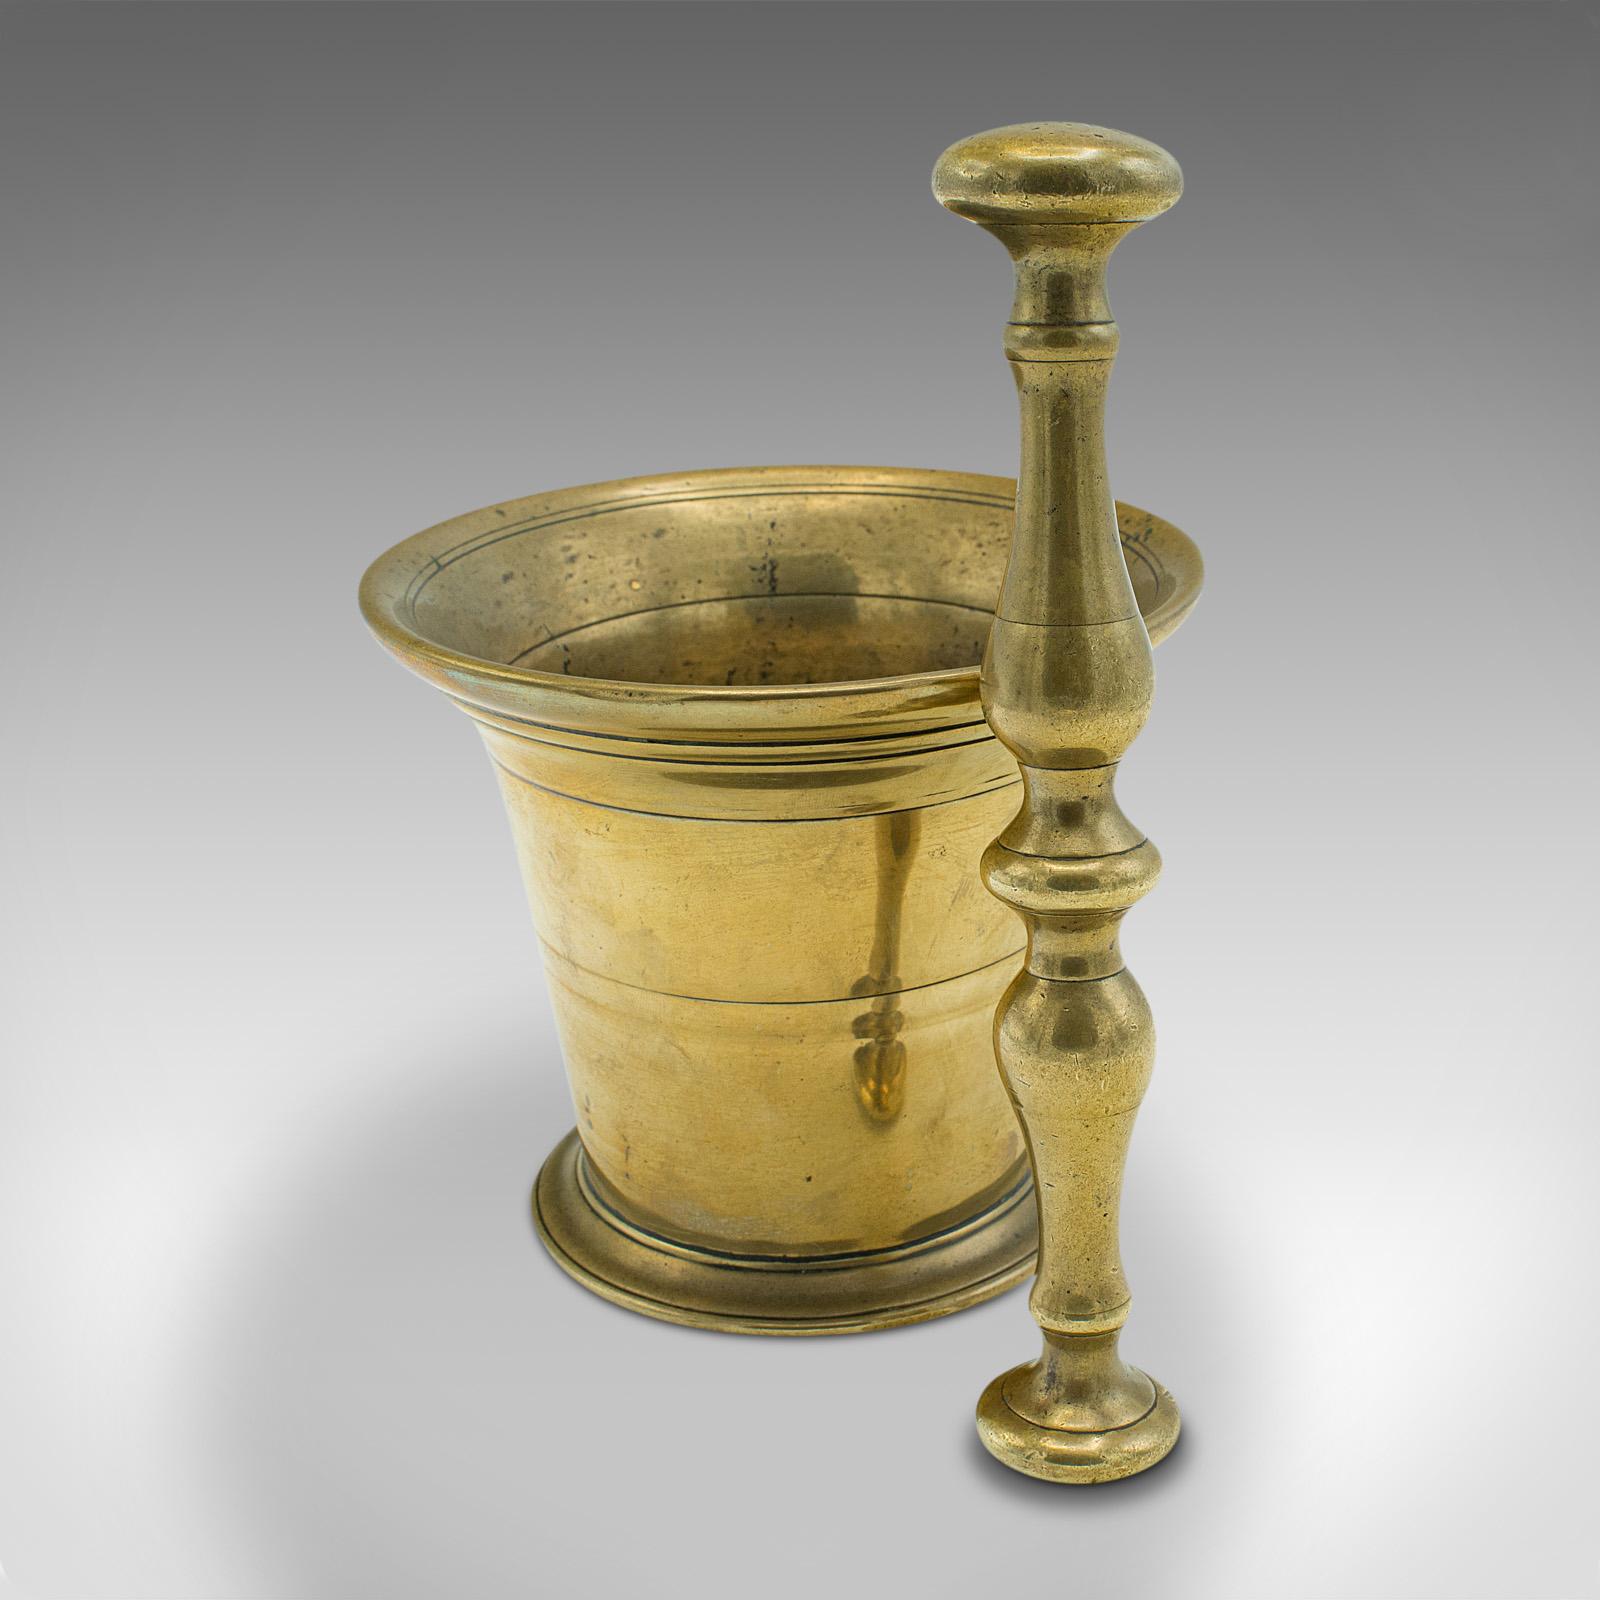 Antique Apothecary Mortar and Pestle, English, Brass, Chemist, Victorian, C.1850 For Sale 4